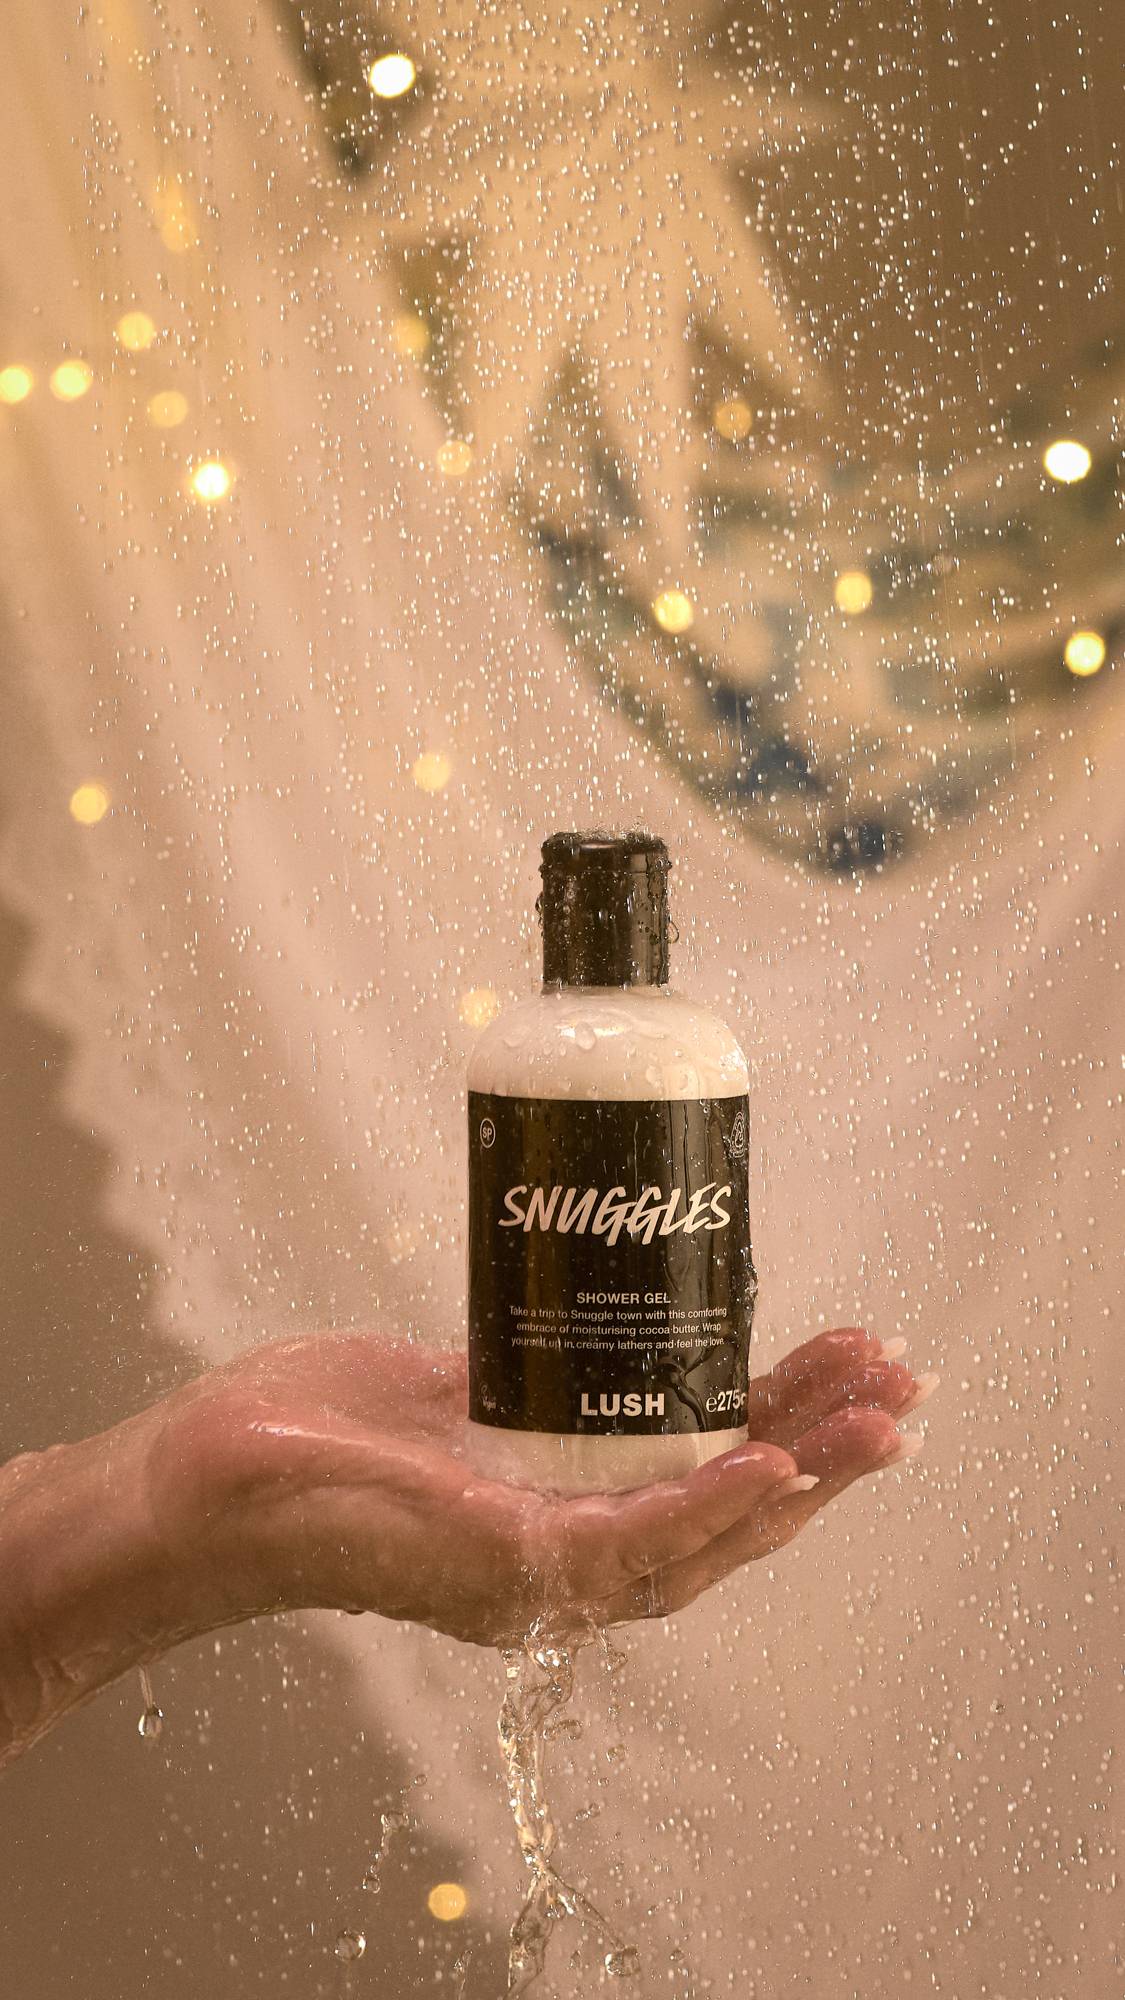 A close-up of the model's hand holding the Snuggles shower gel bottle under running shower water. 